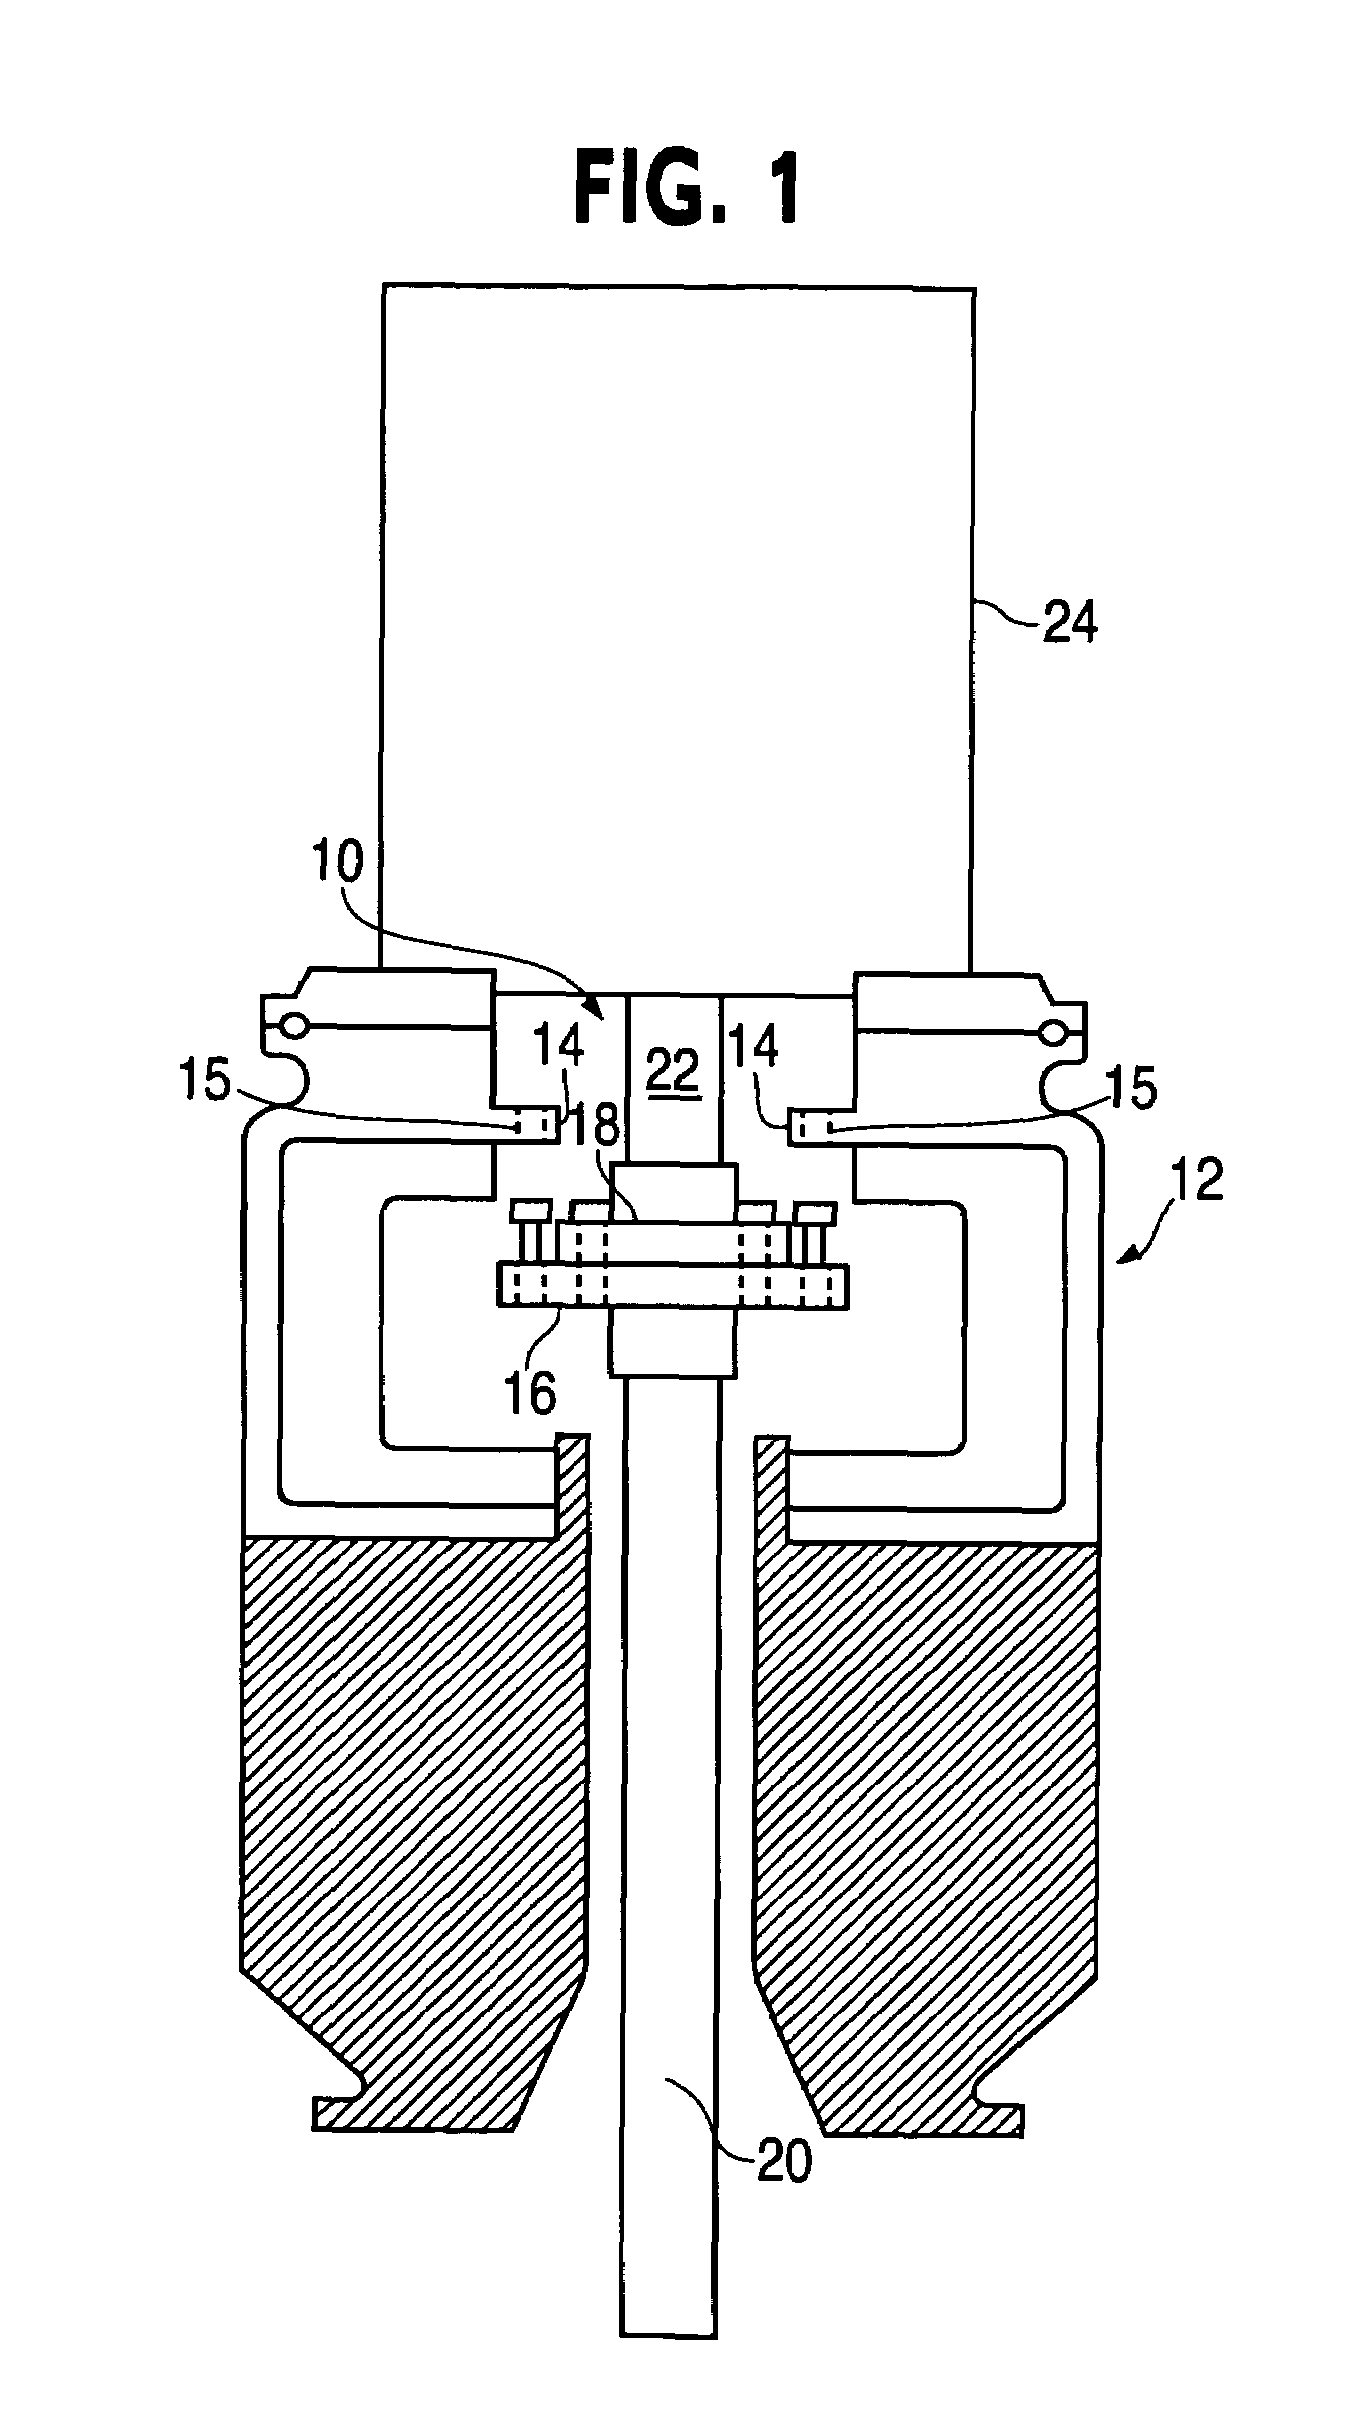 Coupling assembly and method for connecting and disconnecting a shaft assembly